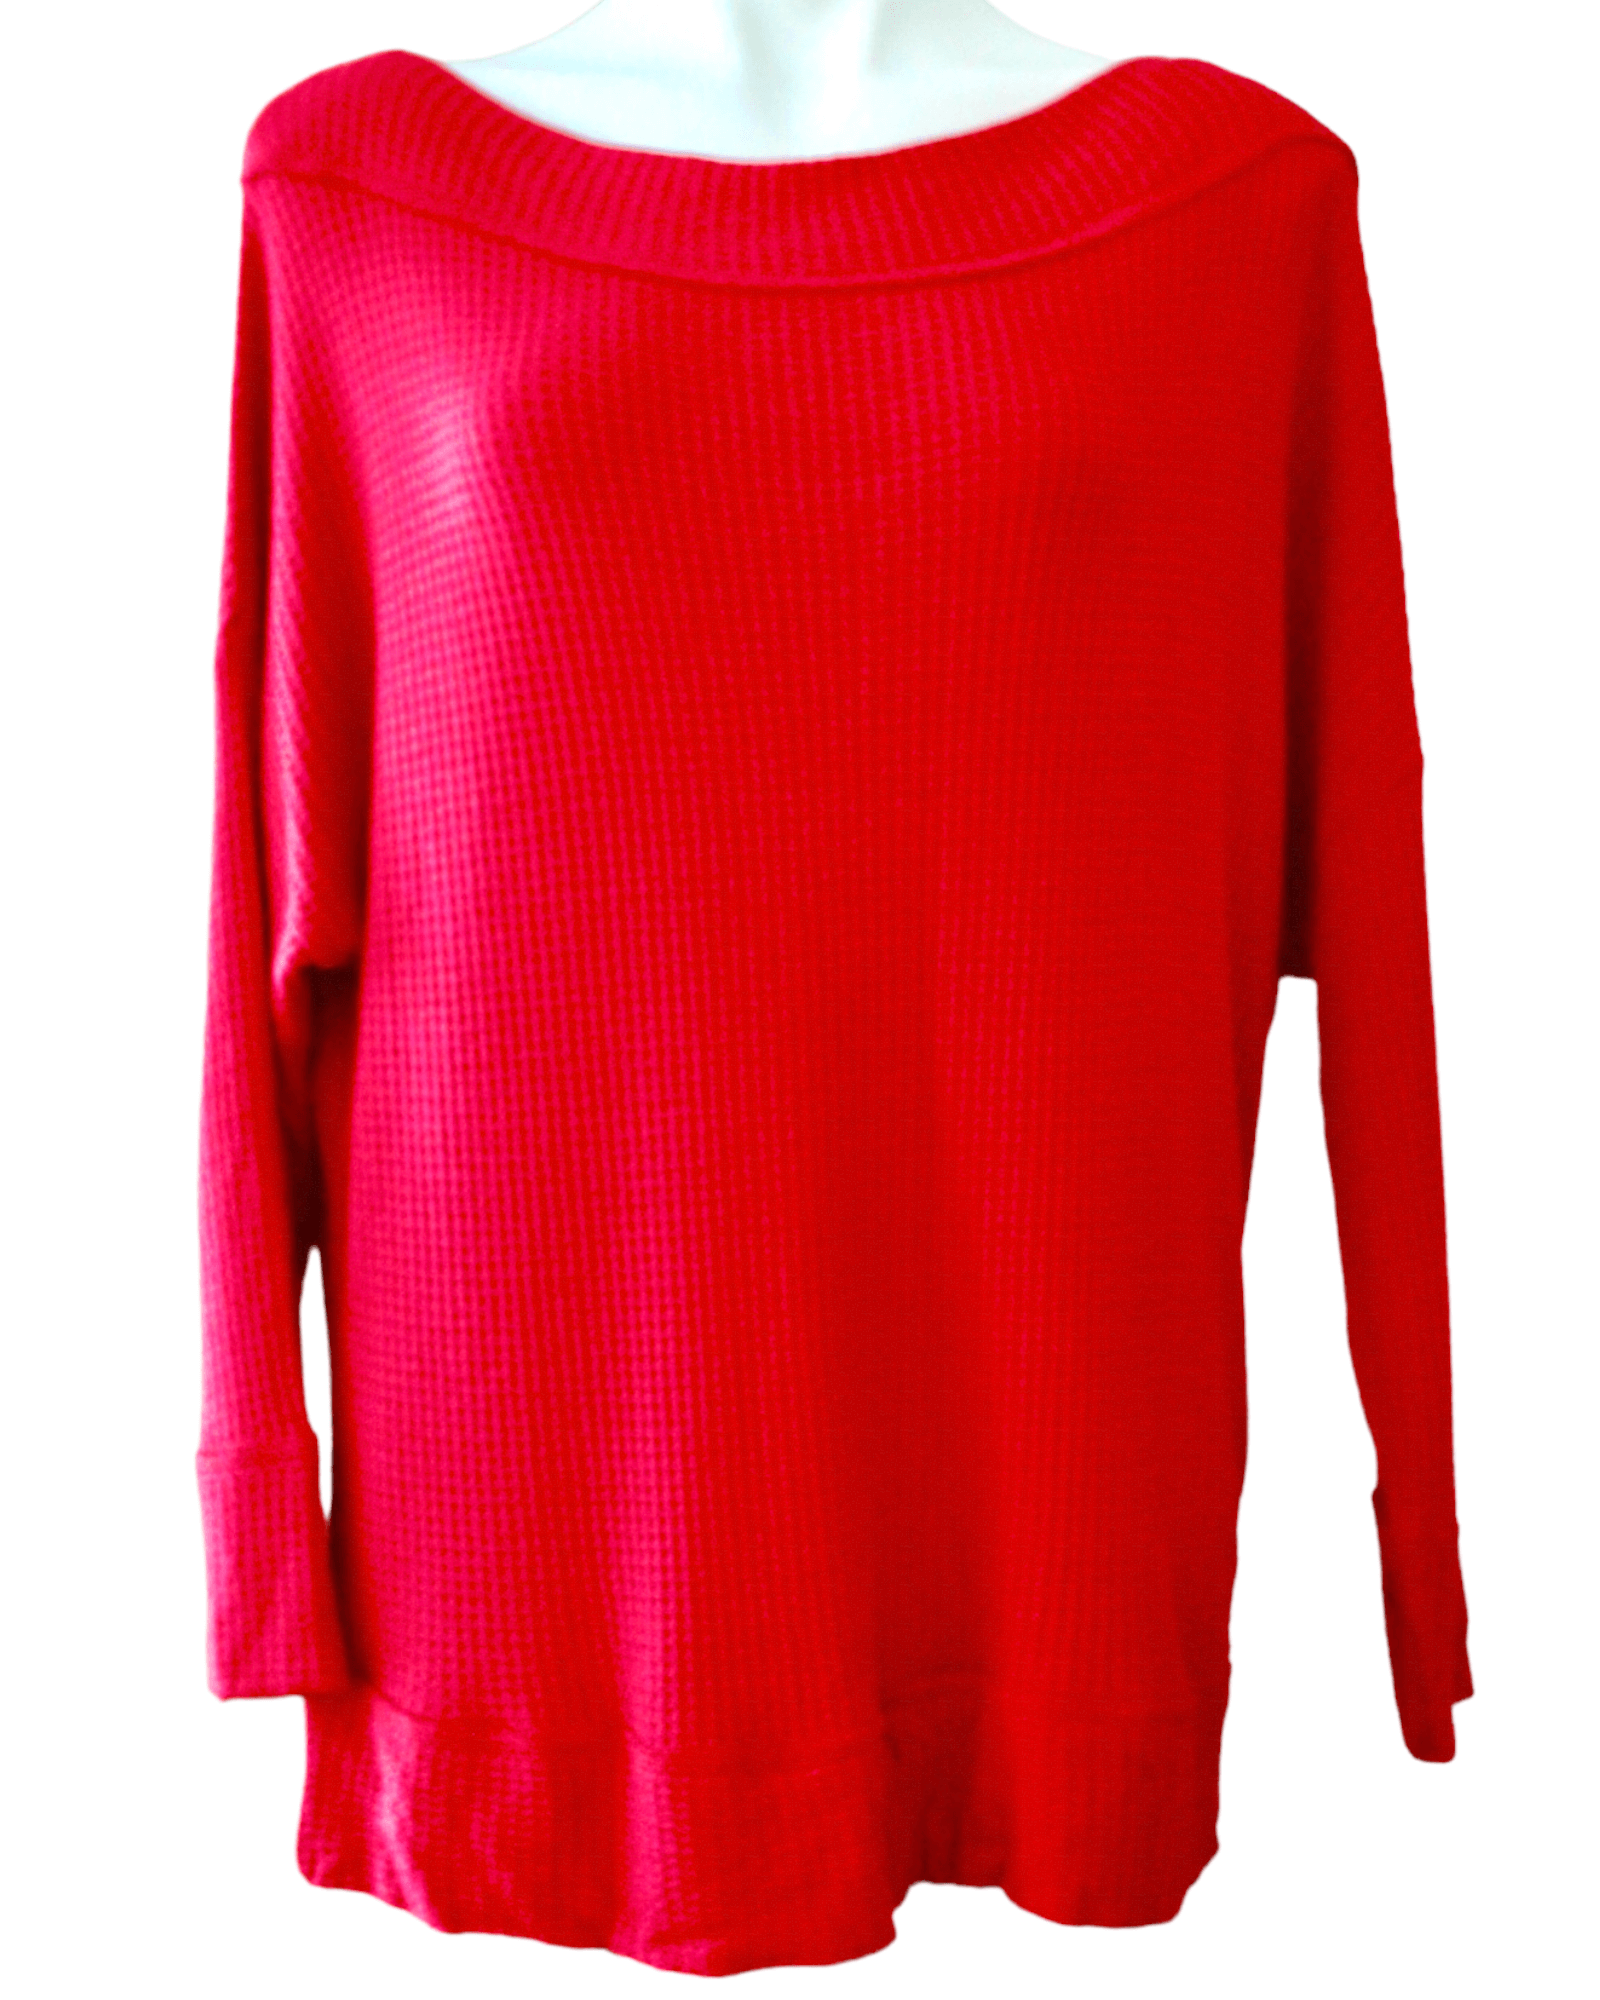 Bright Winter LUCKY BRAND red waffle knit top